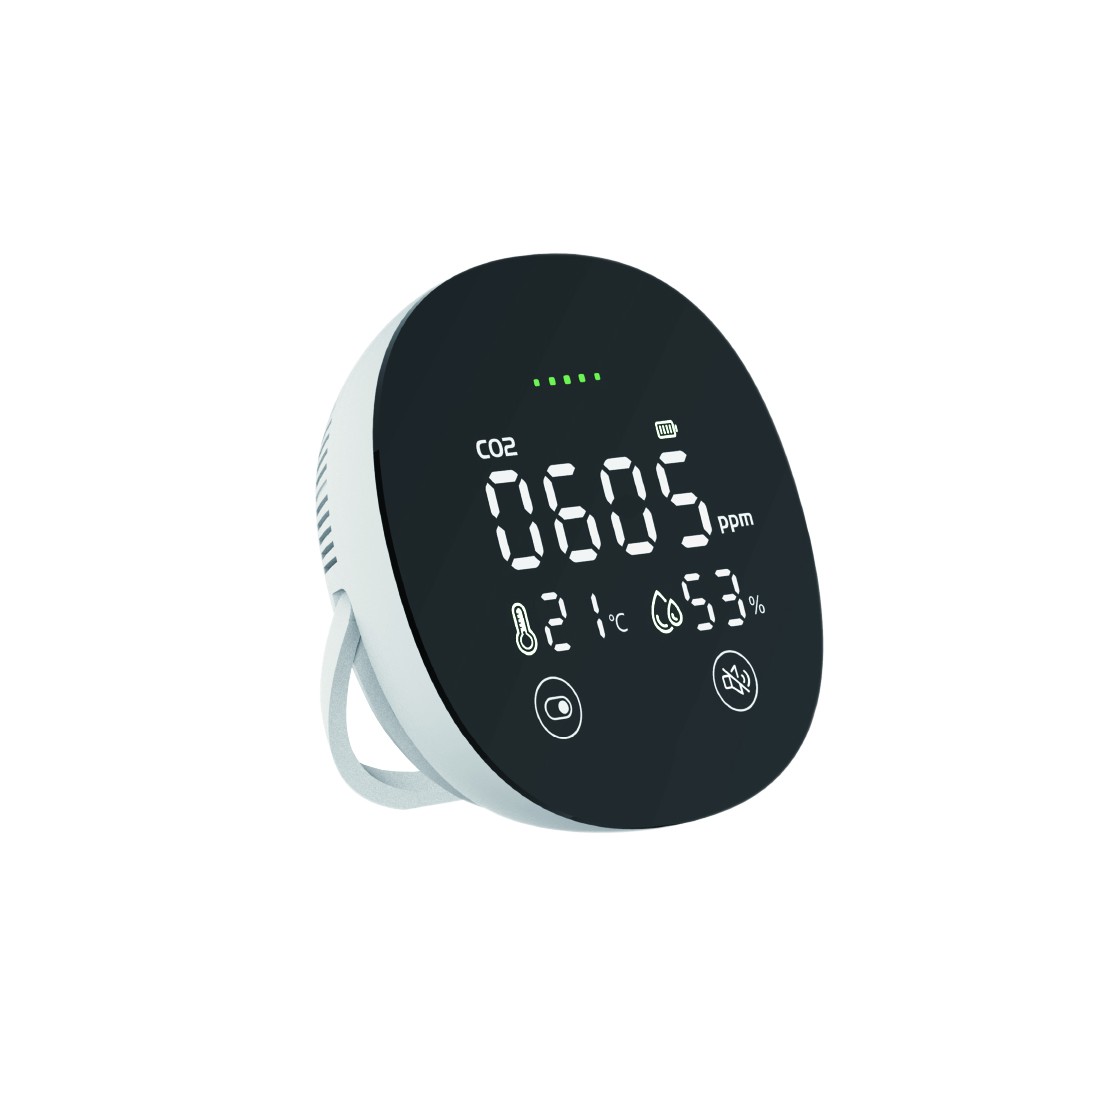 CO2 detector with LCD display